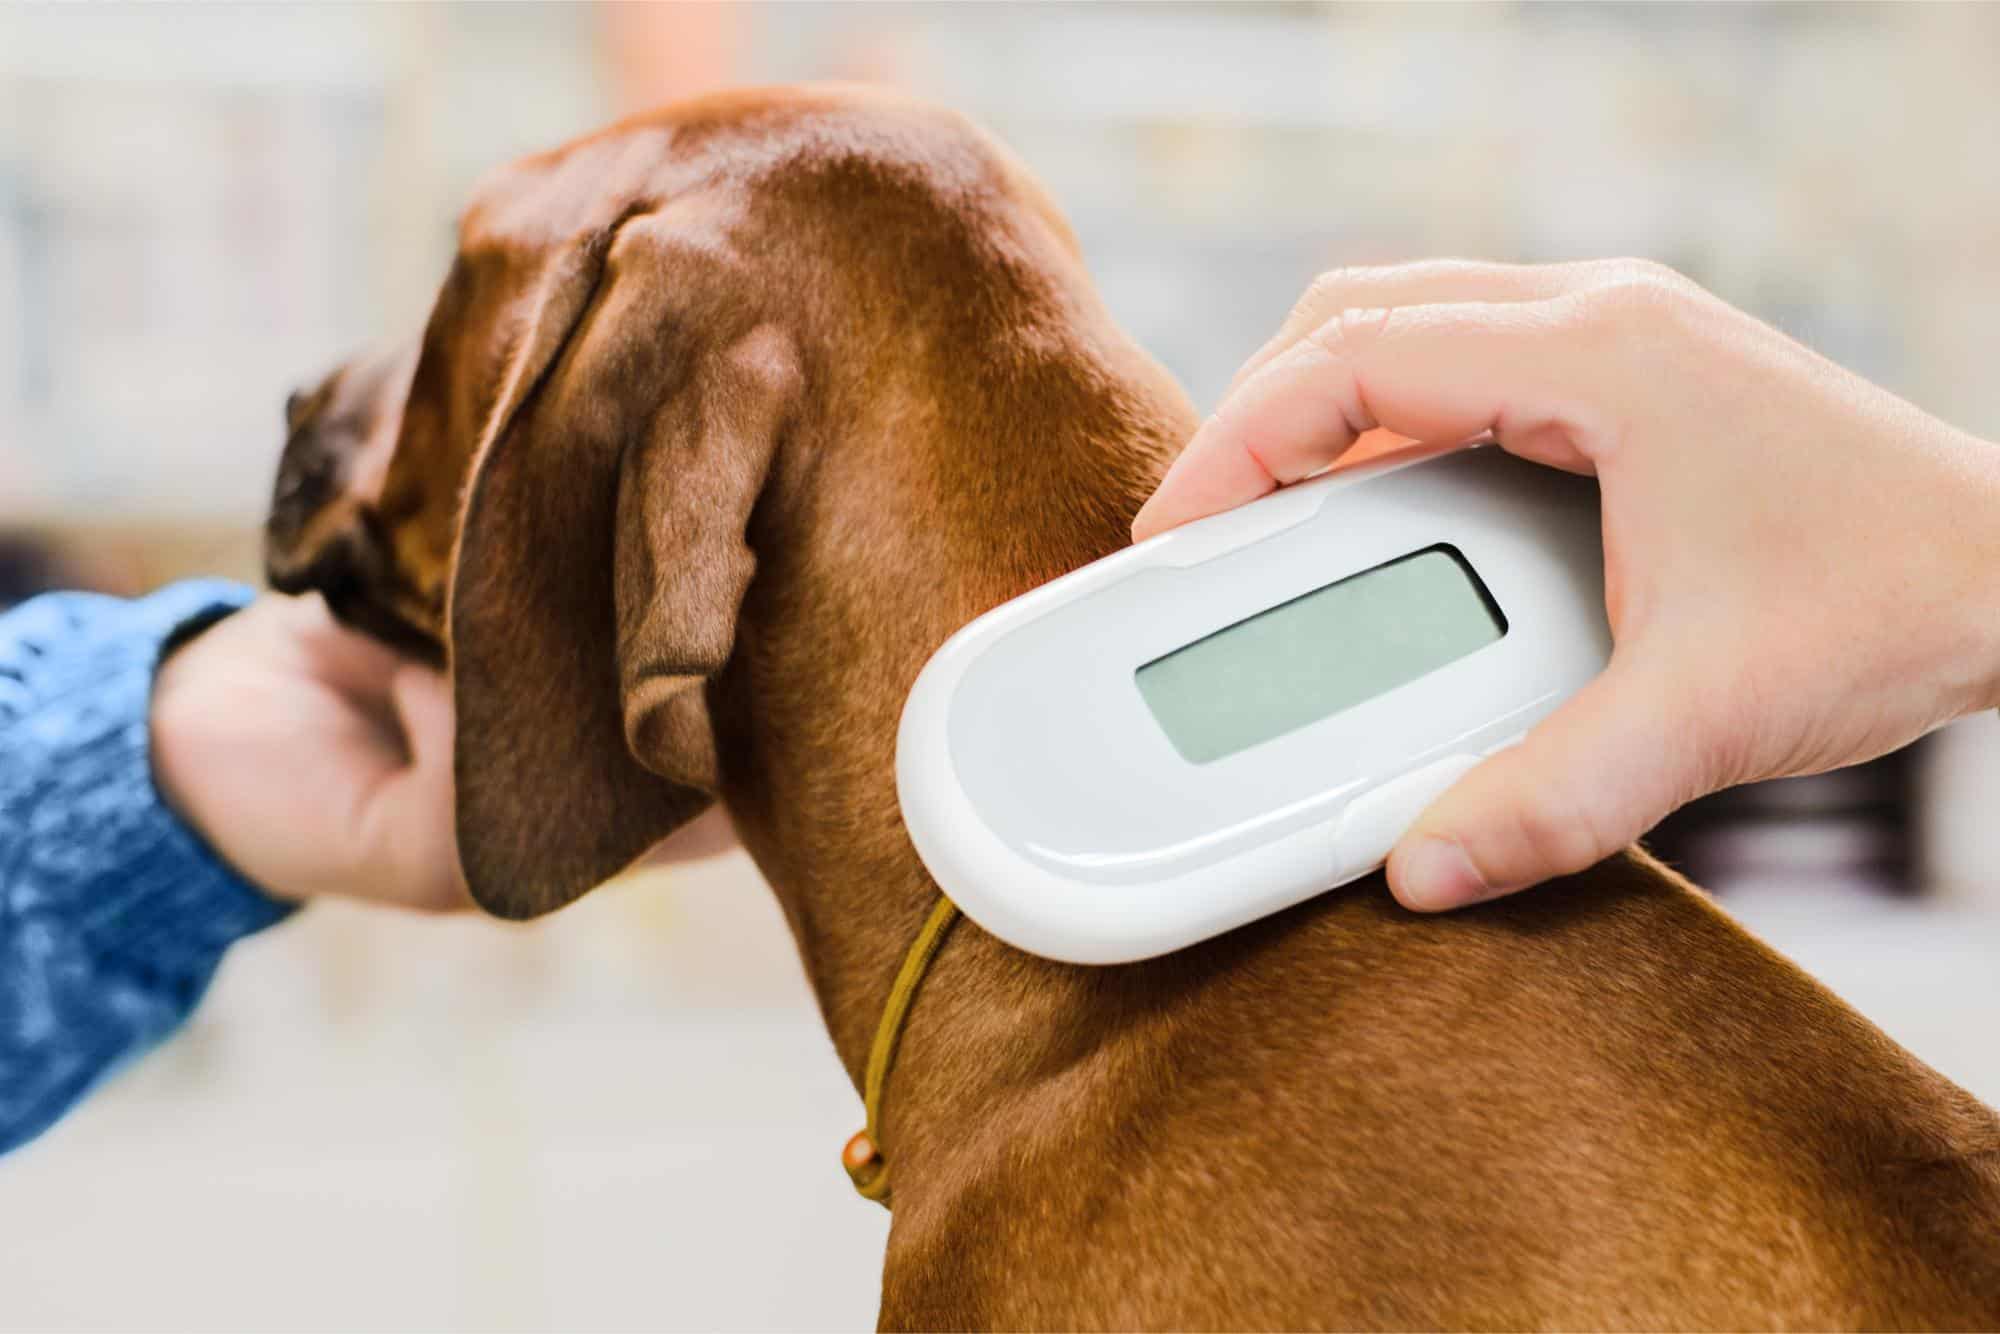 Scanning dog for microchip